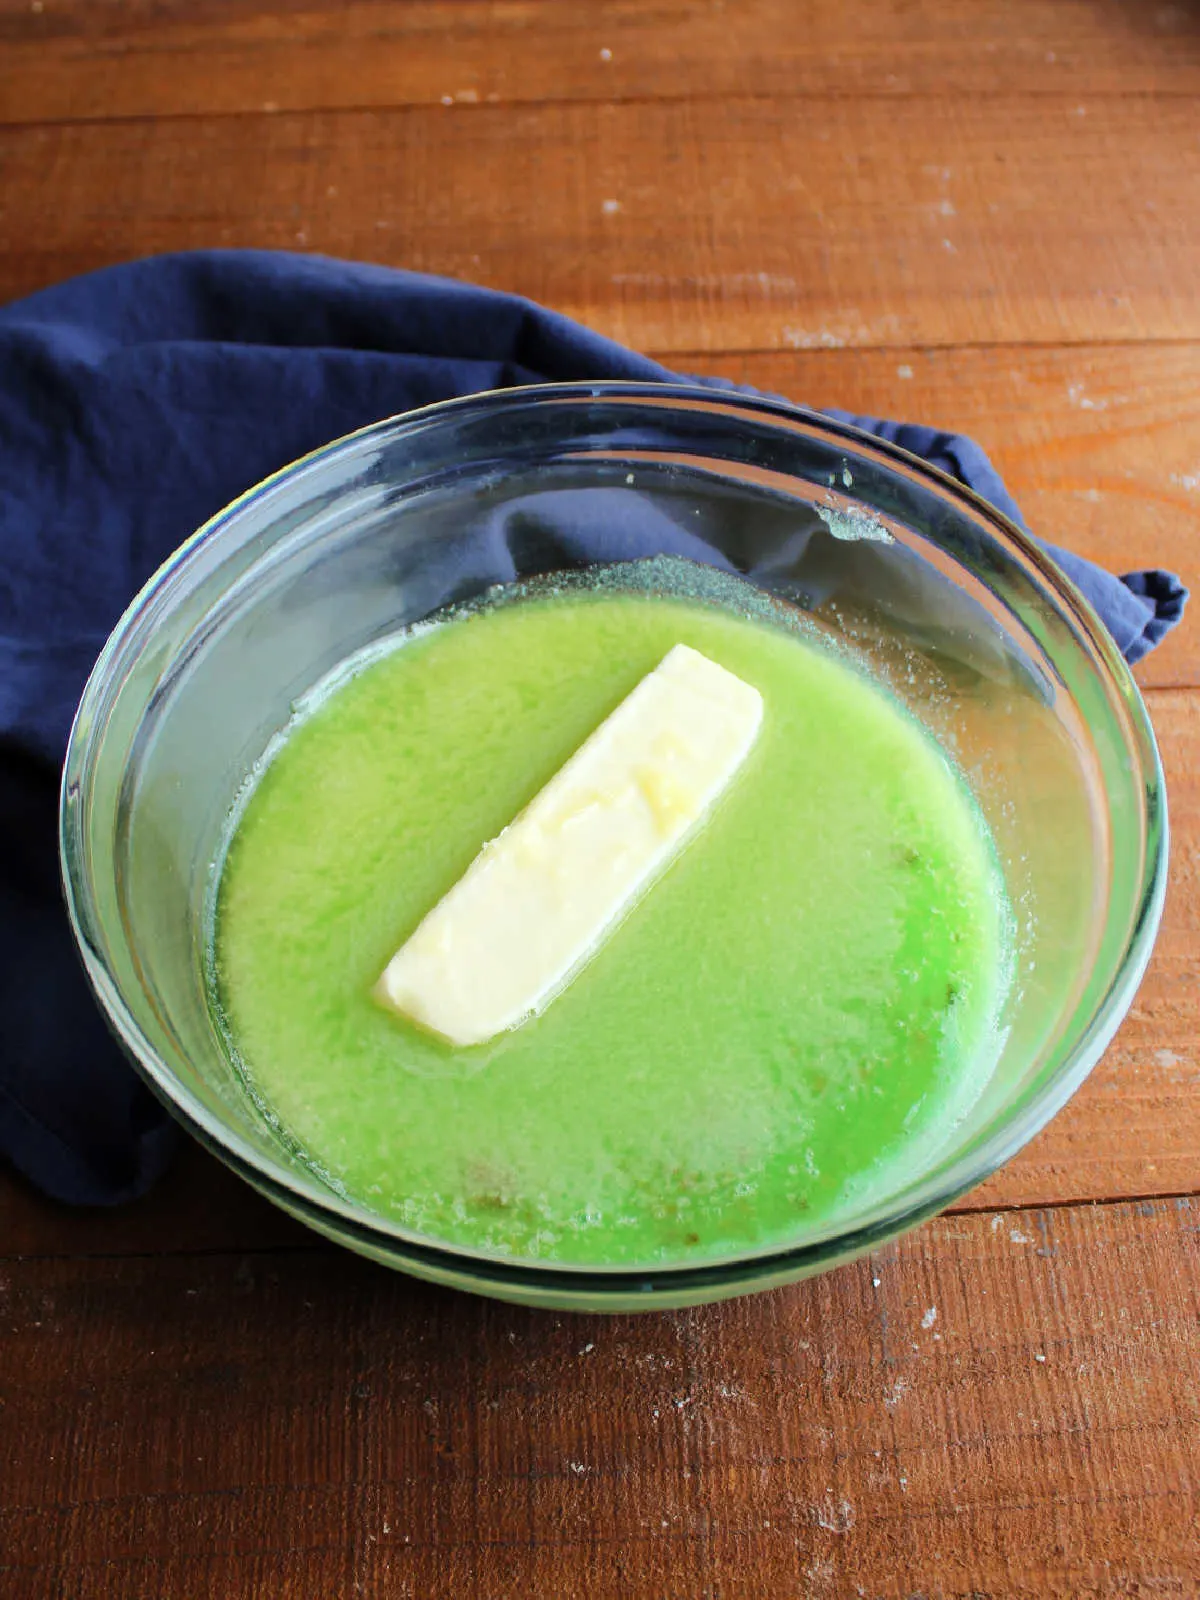 Hot green jello mixture in a bowl with a stick of butter melting inside.